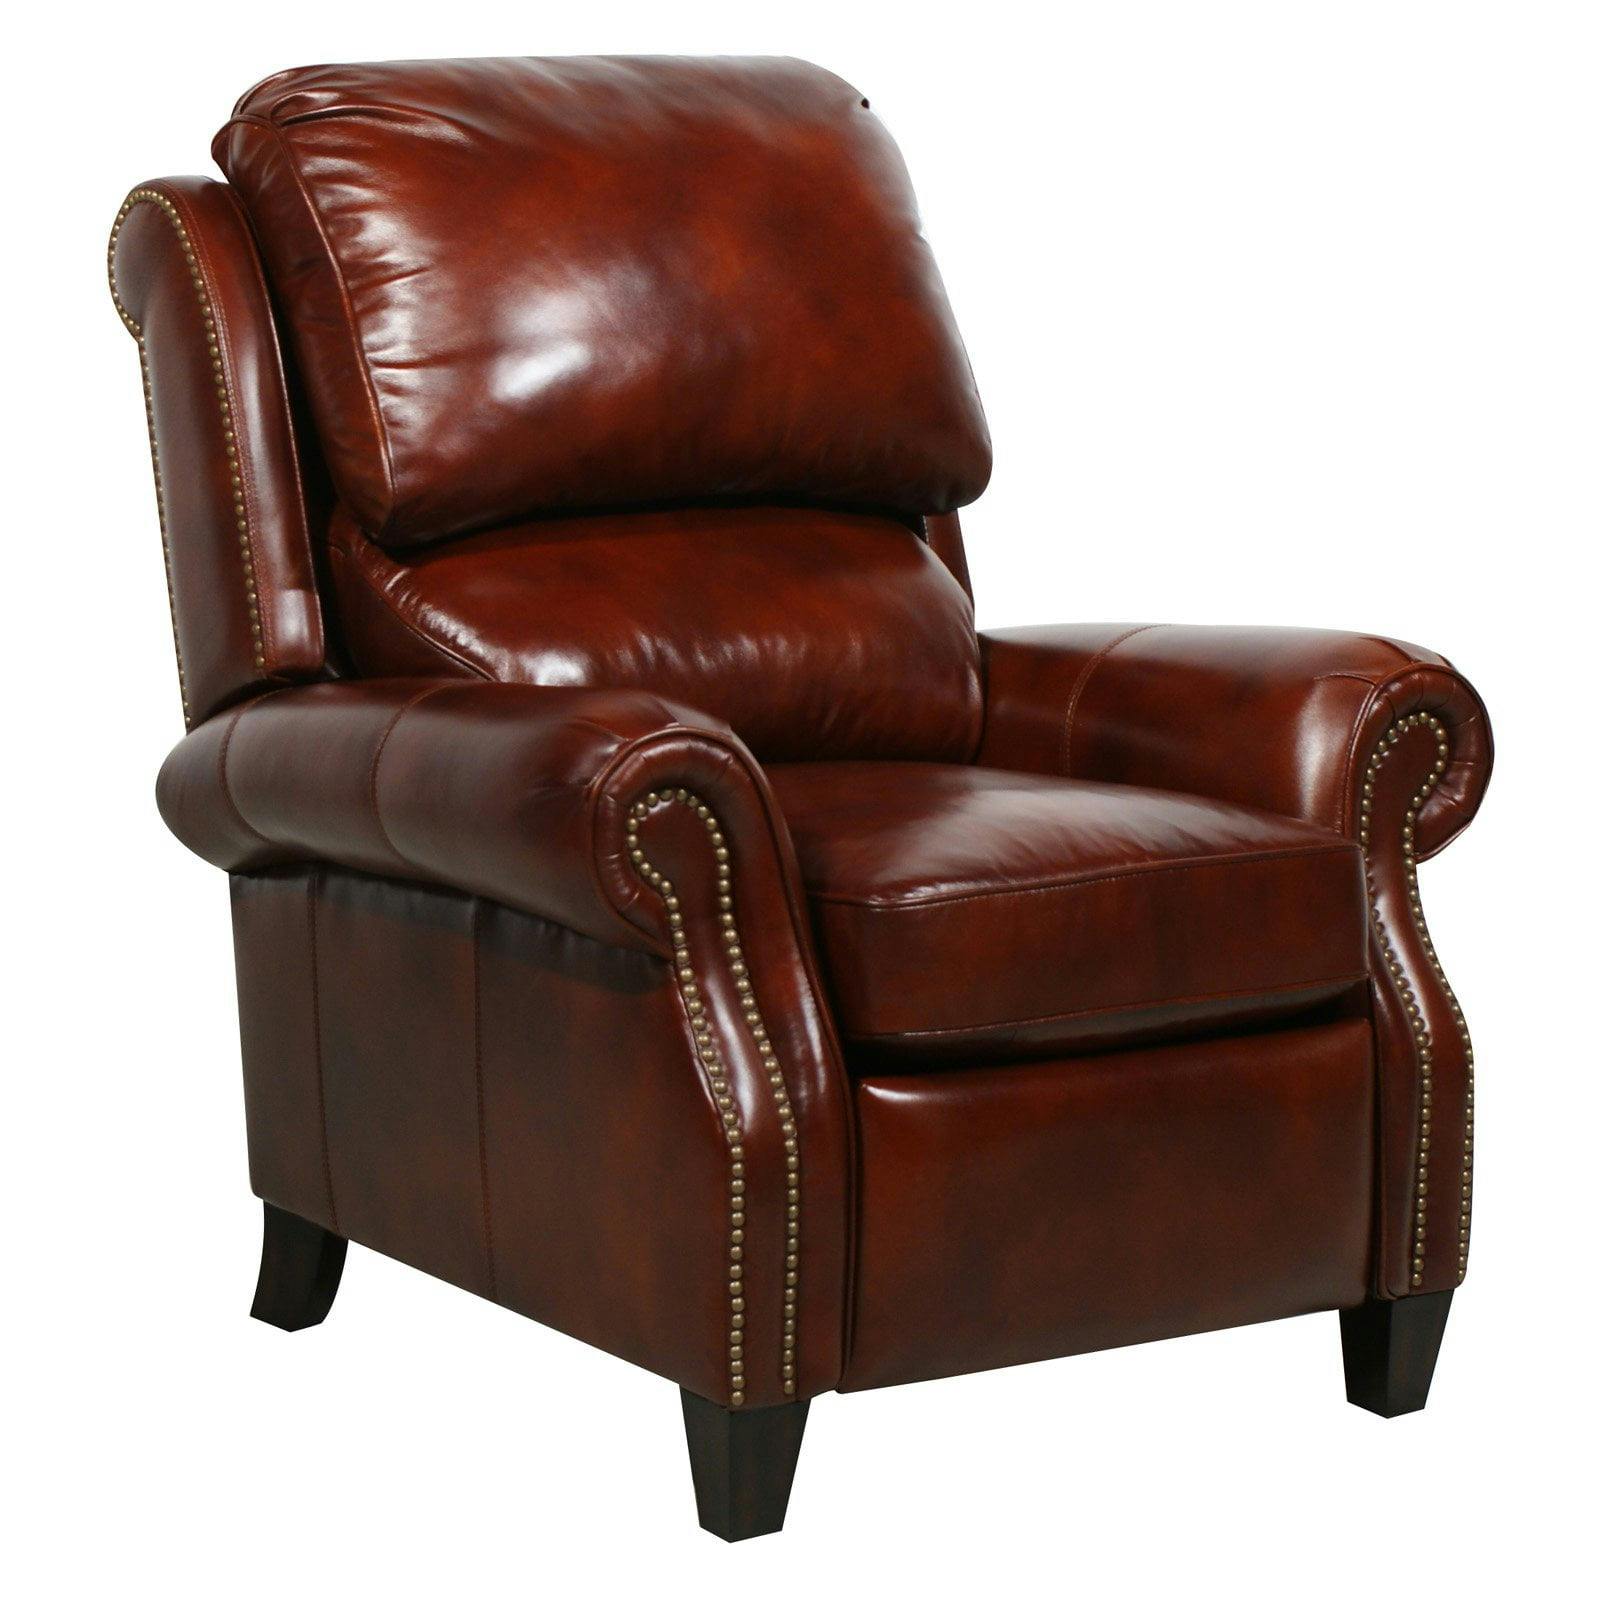 Traditional Luxe Yellow Leather Recliner with Wood Accents and Nailhead Trim